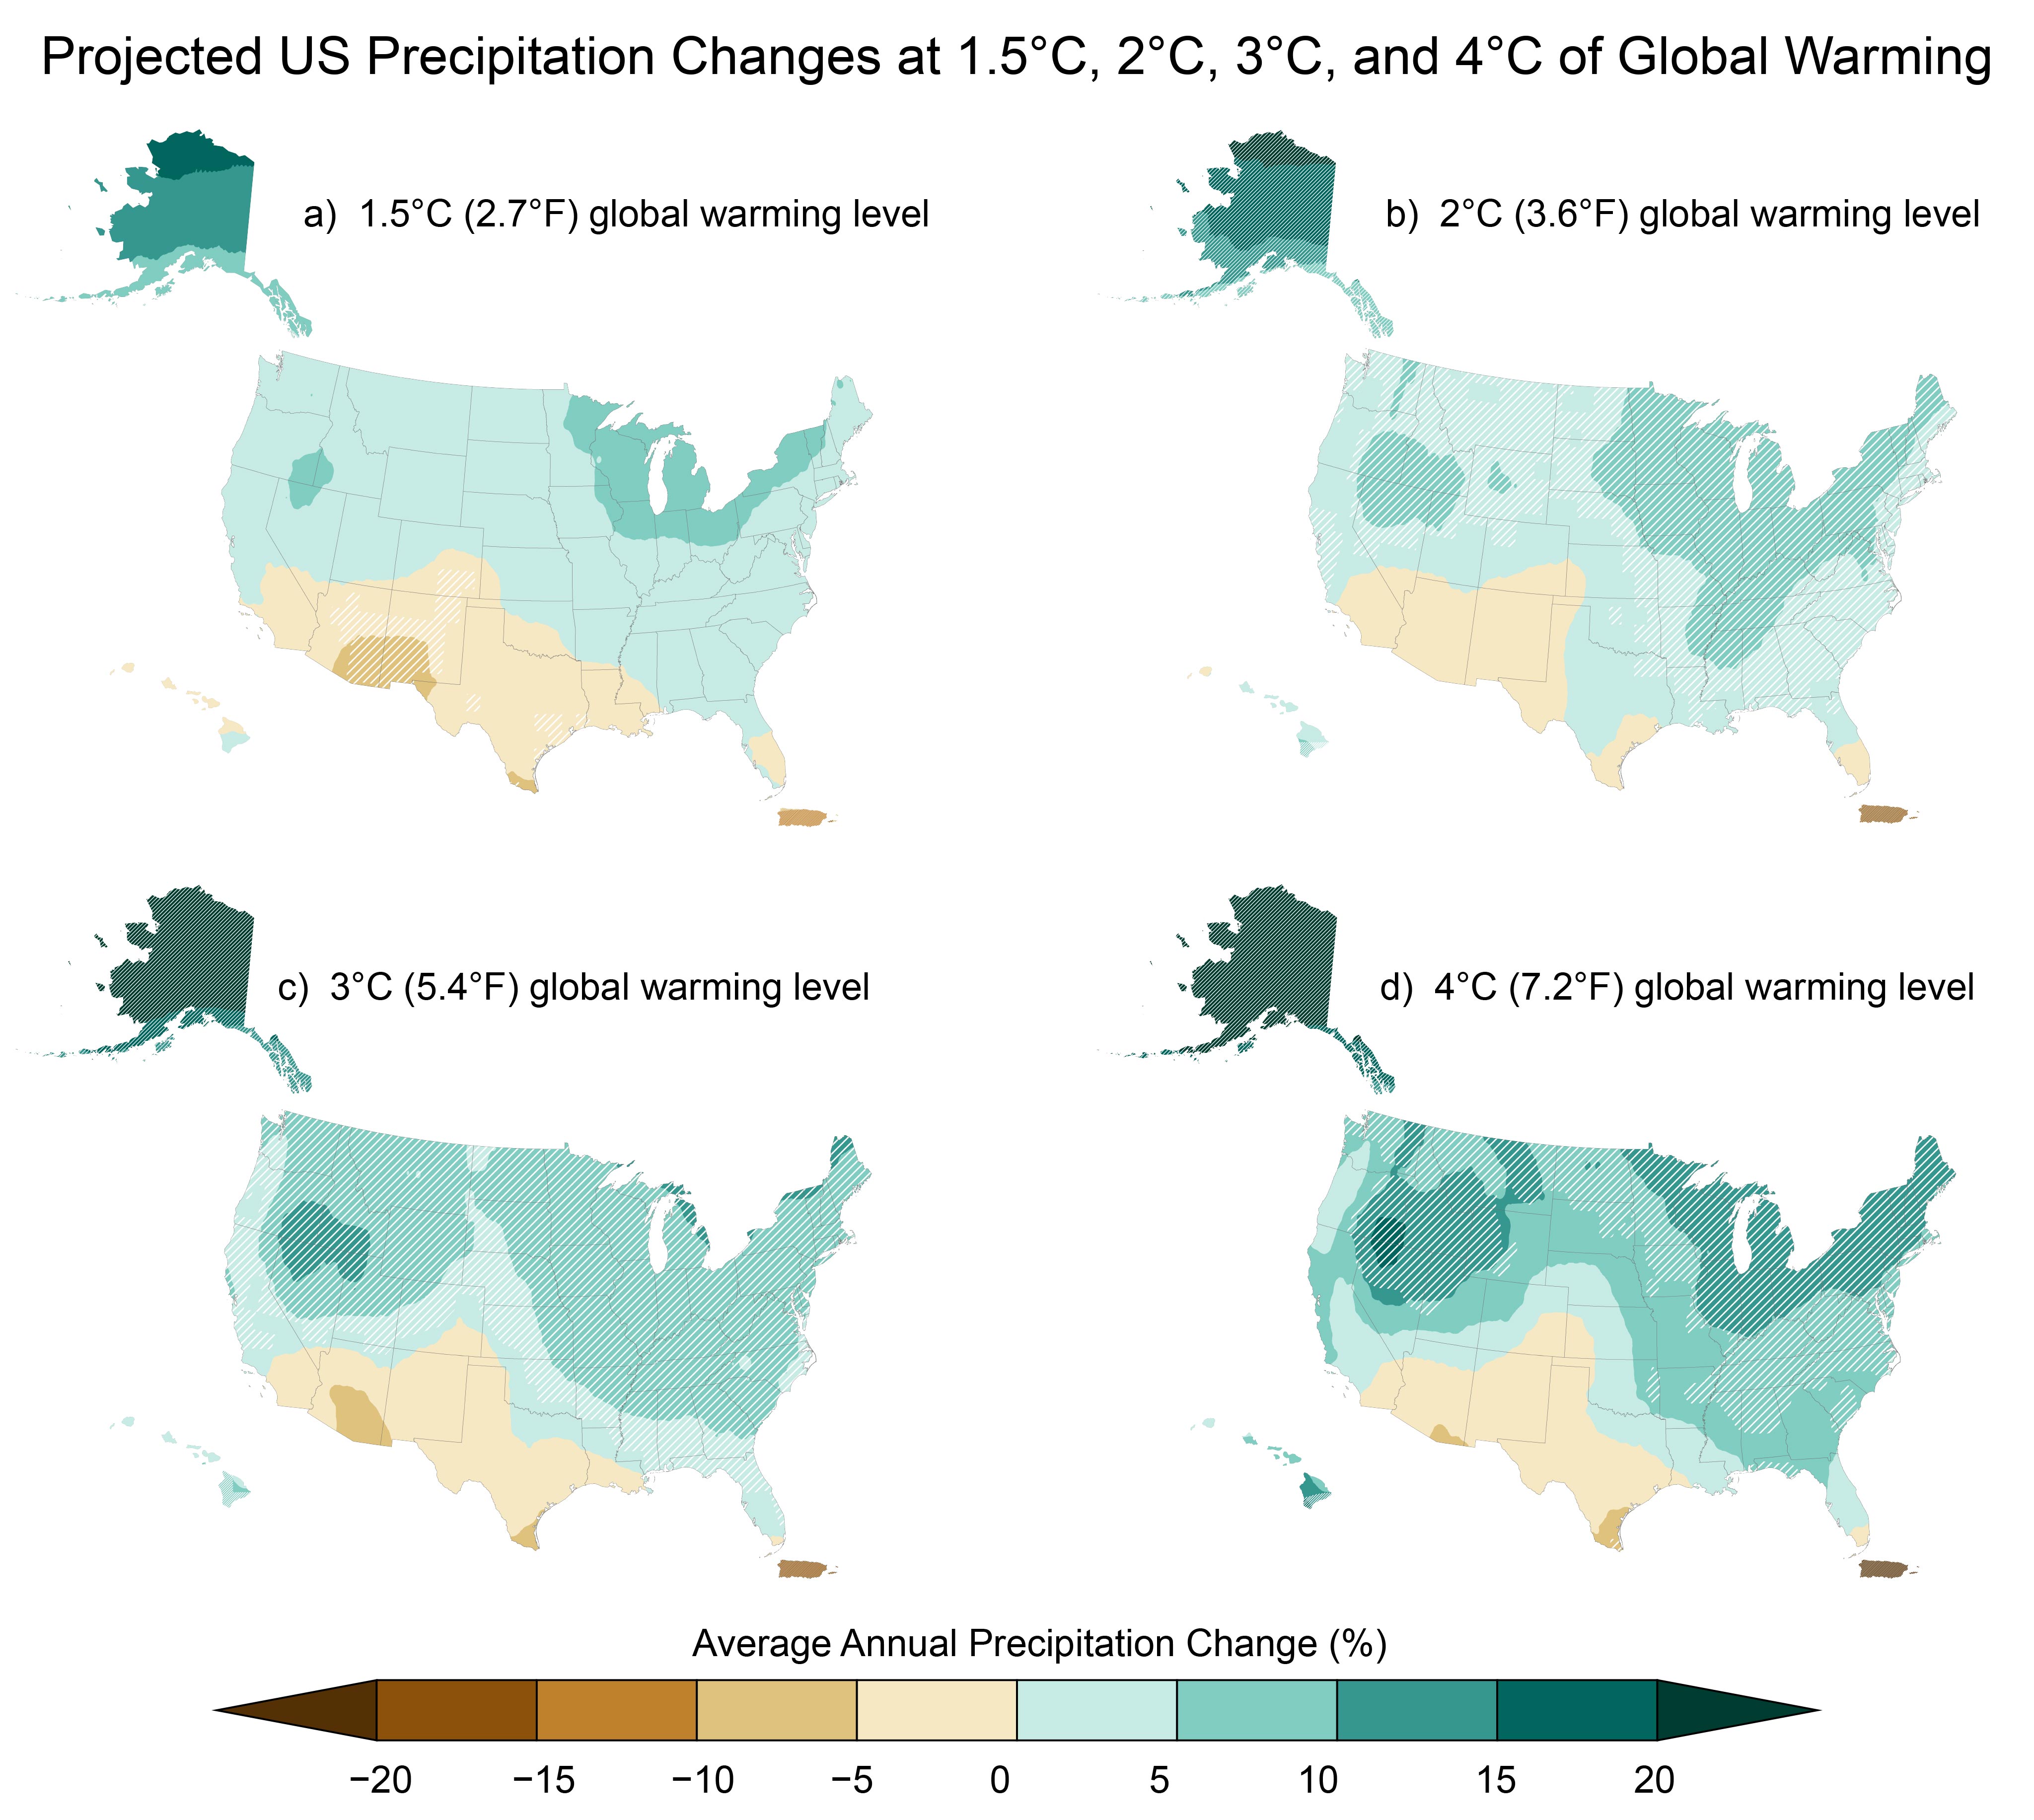 Projected US Precipitation Changes at 1.5°C, 2°C, 3°C, and 4°C of Global Warming